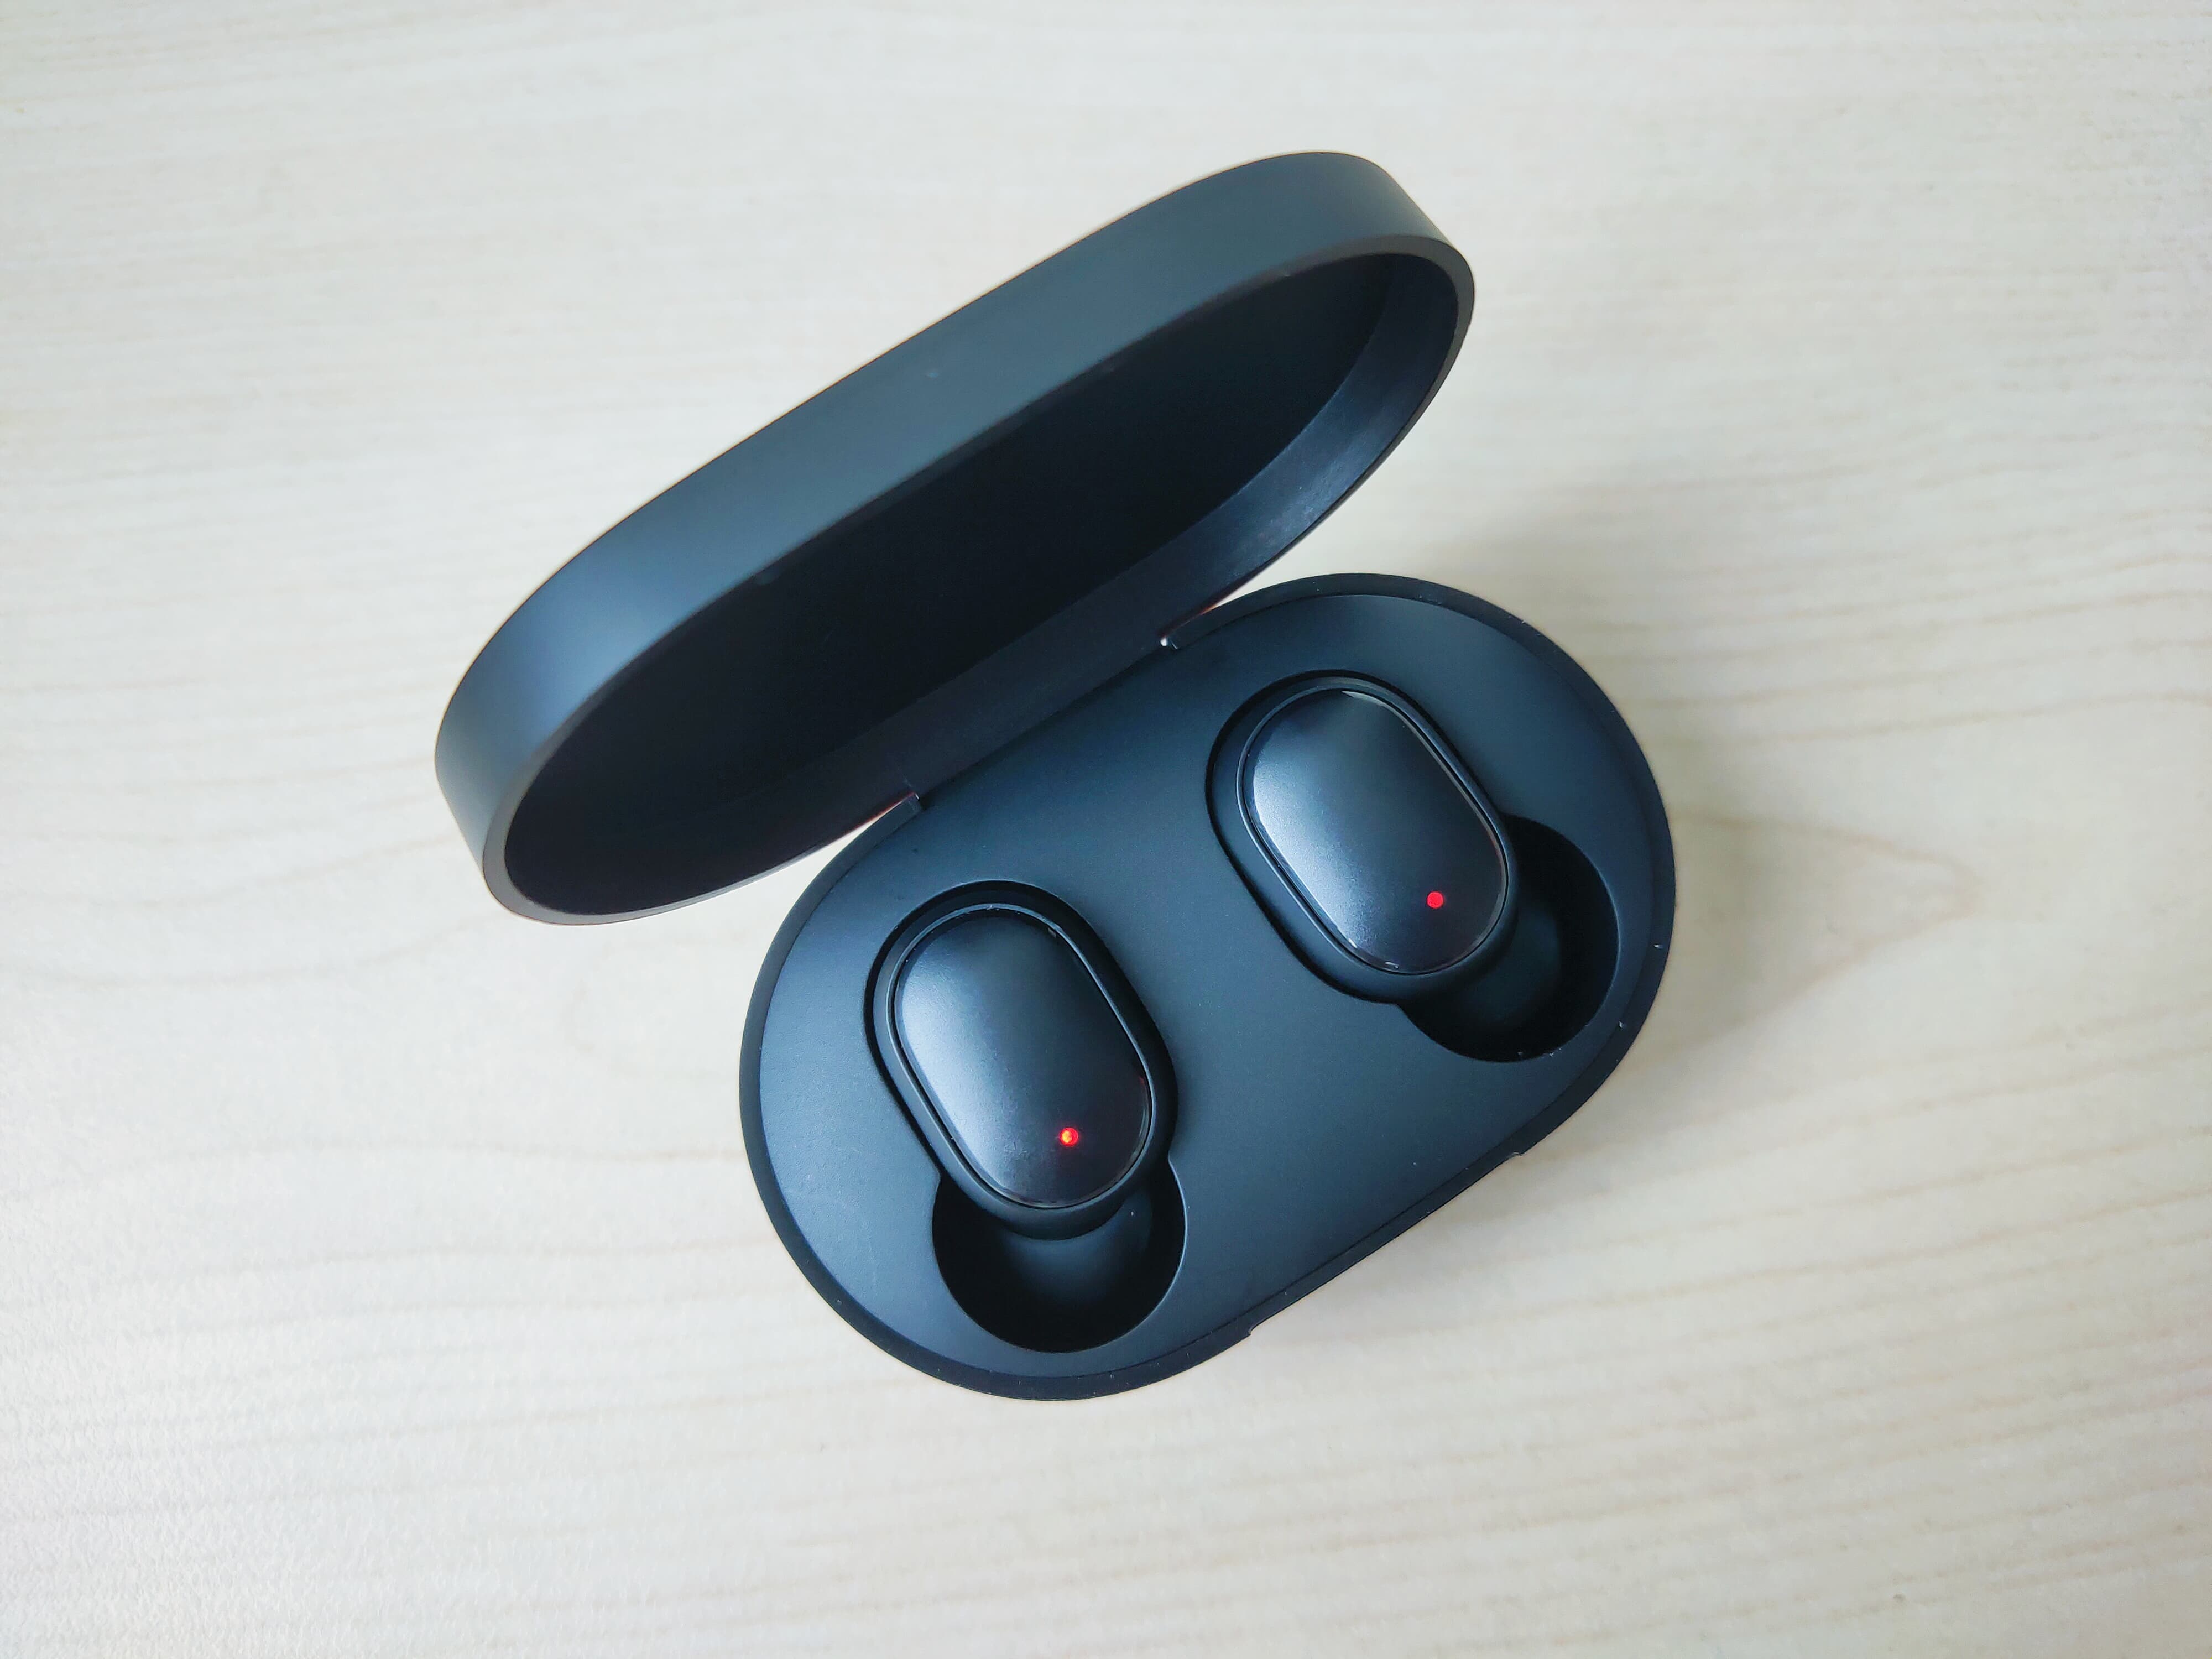 Redmi AirDots 2 out of the box: just 79 yuan to buy it with your eyes closed